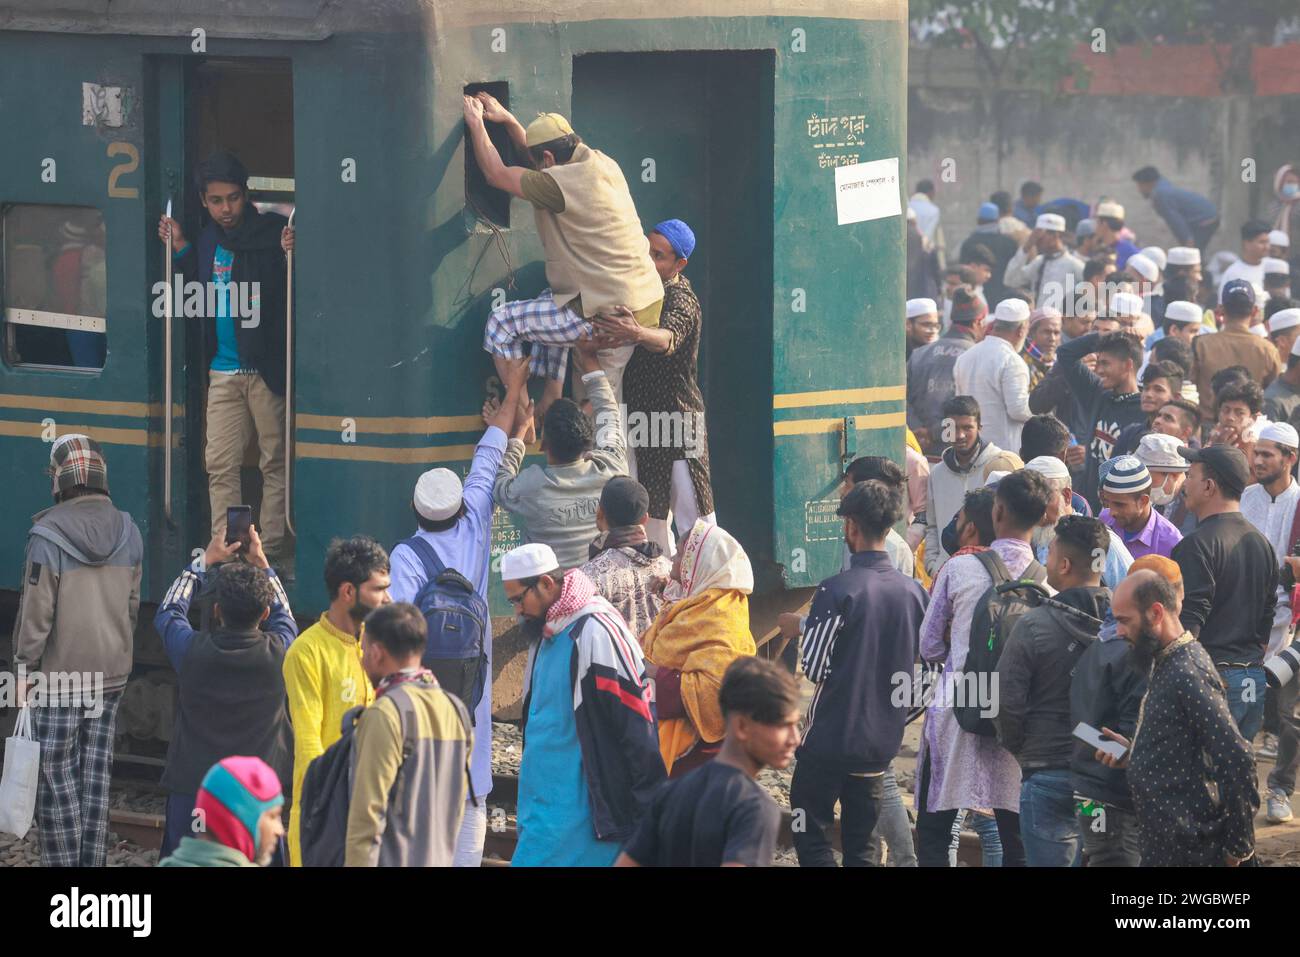 Tongi, Bangladesh. 04th Feb, 2024. February 4, 2024 - Tongi, Bangladesh - Muslim devotees try to catch an over-crowded train as they return home after a three-day World Congregation of Muslims, or Biswa Ijtema, on the banks of the River Turag just outside Dhaka, Bangladesh. The 1st phase of Biswa Ijtema ends today with Akheri Munajat, or the Final Prayer, and Muslim devotees from across the world participated in the second largest world congregation of Muslims. Photo by Suvra Kanti Das/ABACAPRESS.COM Credit: Abaca Press/Alamy Live News Stock Photo